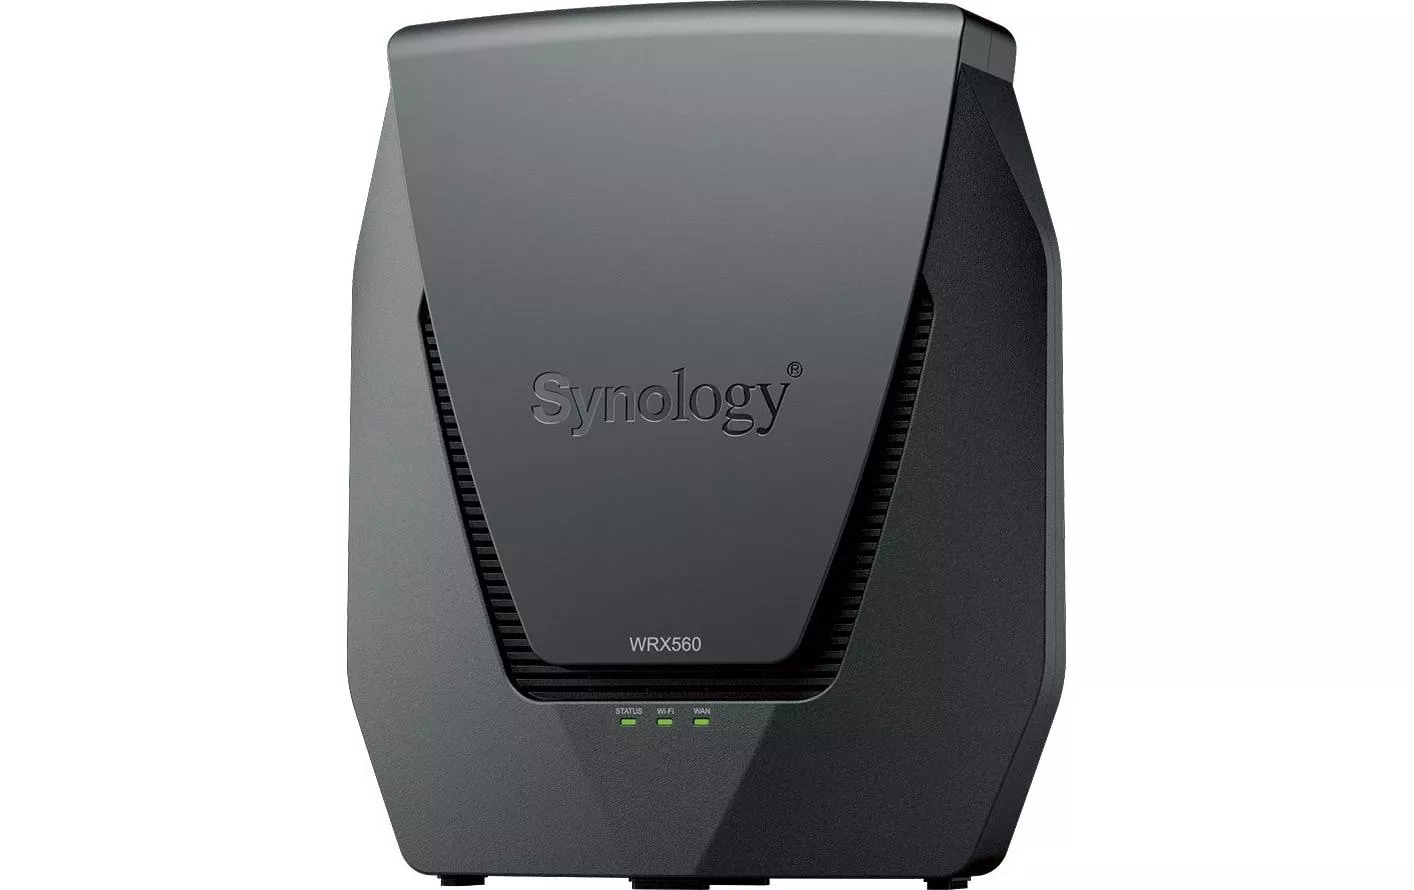 Router WiFi Dual Band WRX560 di Synology